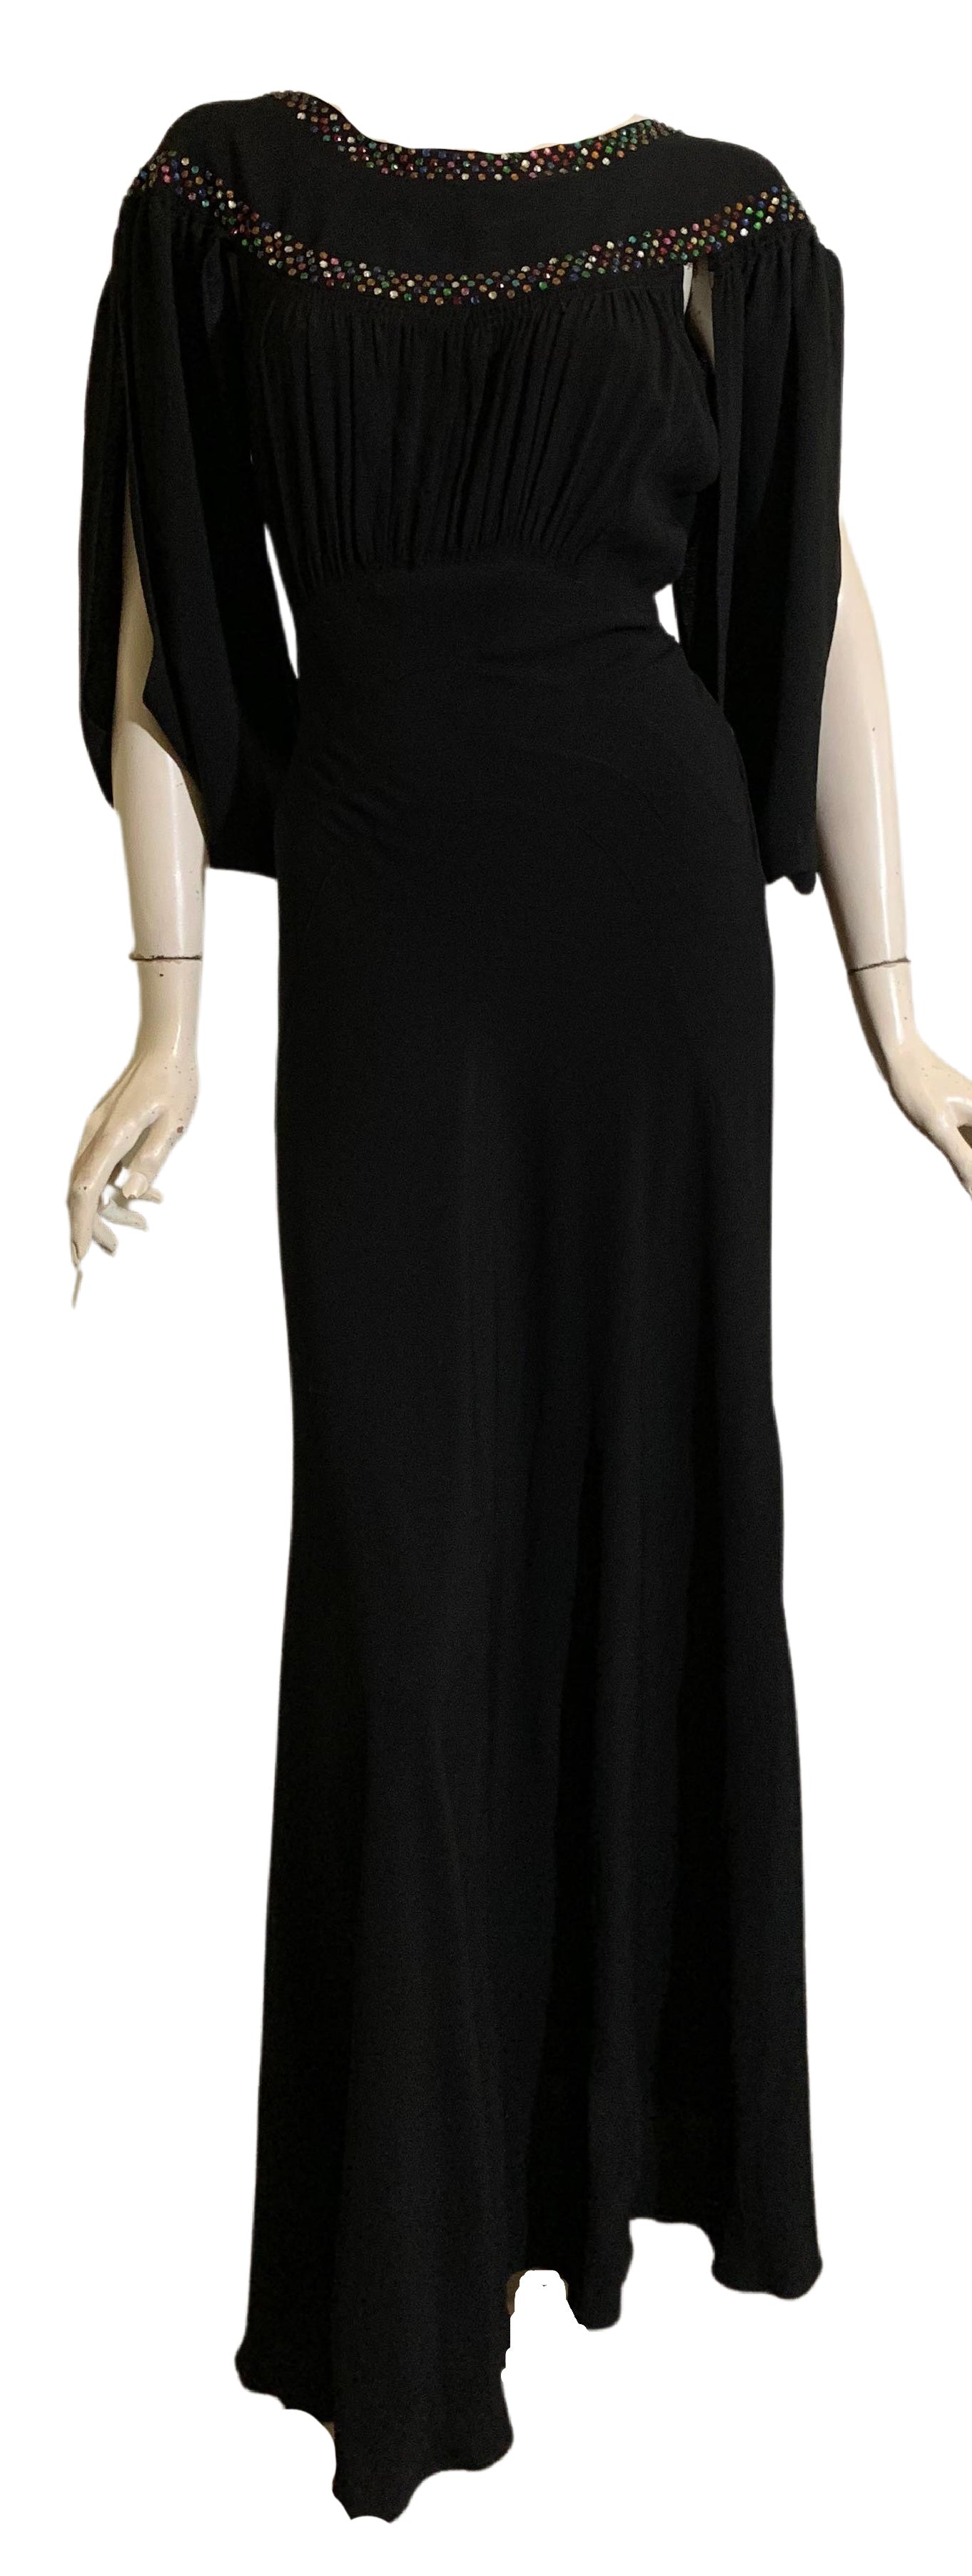 RESERVED Rainbow Vamp! Black Crepe Evening Gown with Rainbow Rhinestones and Side Slit Sleeves and Back circa 1930s